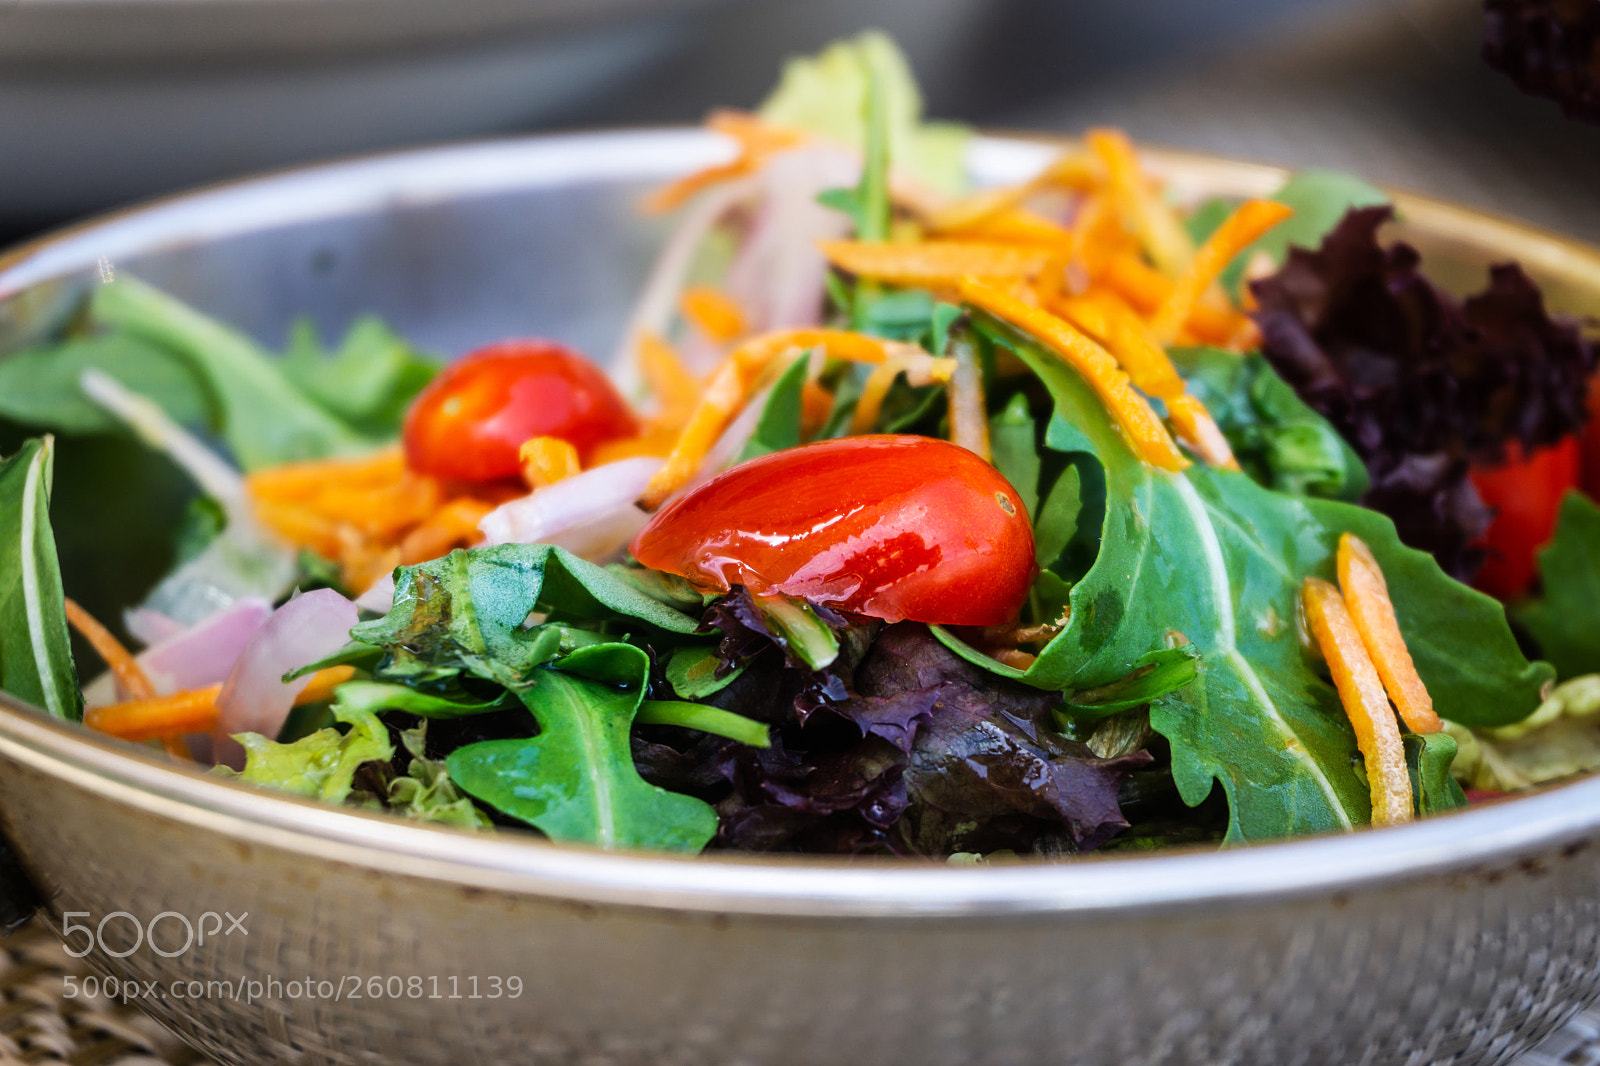 Sony a6000 sample photo. Fresh salad - delicious photography